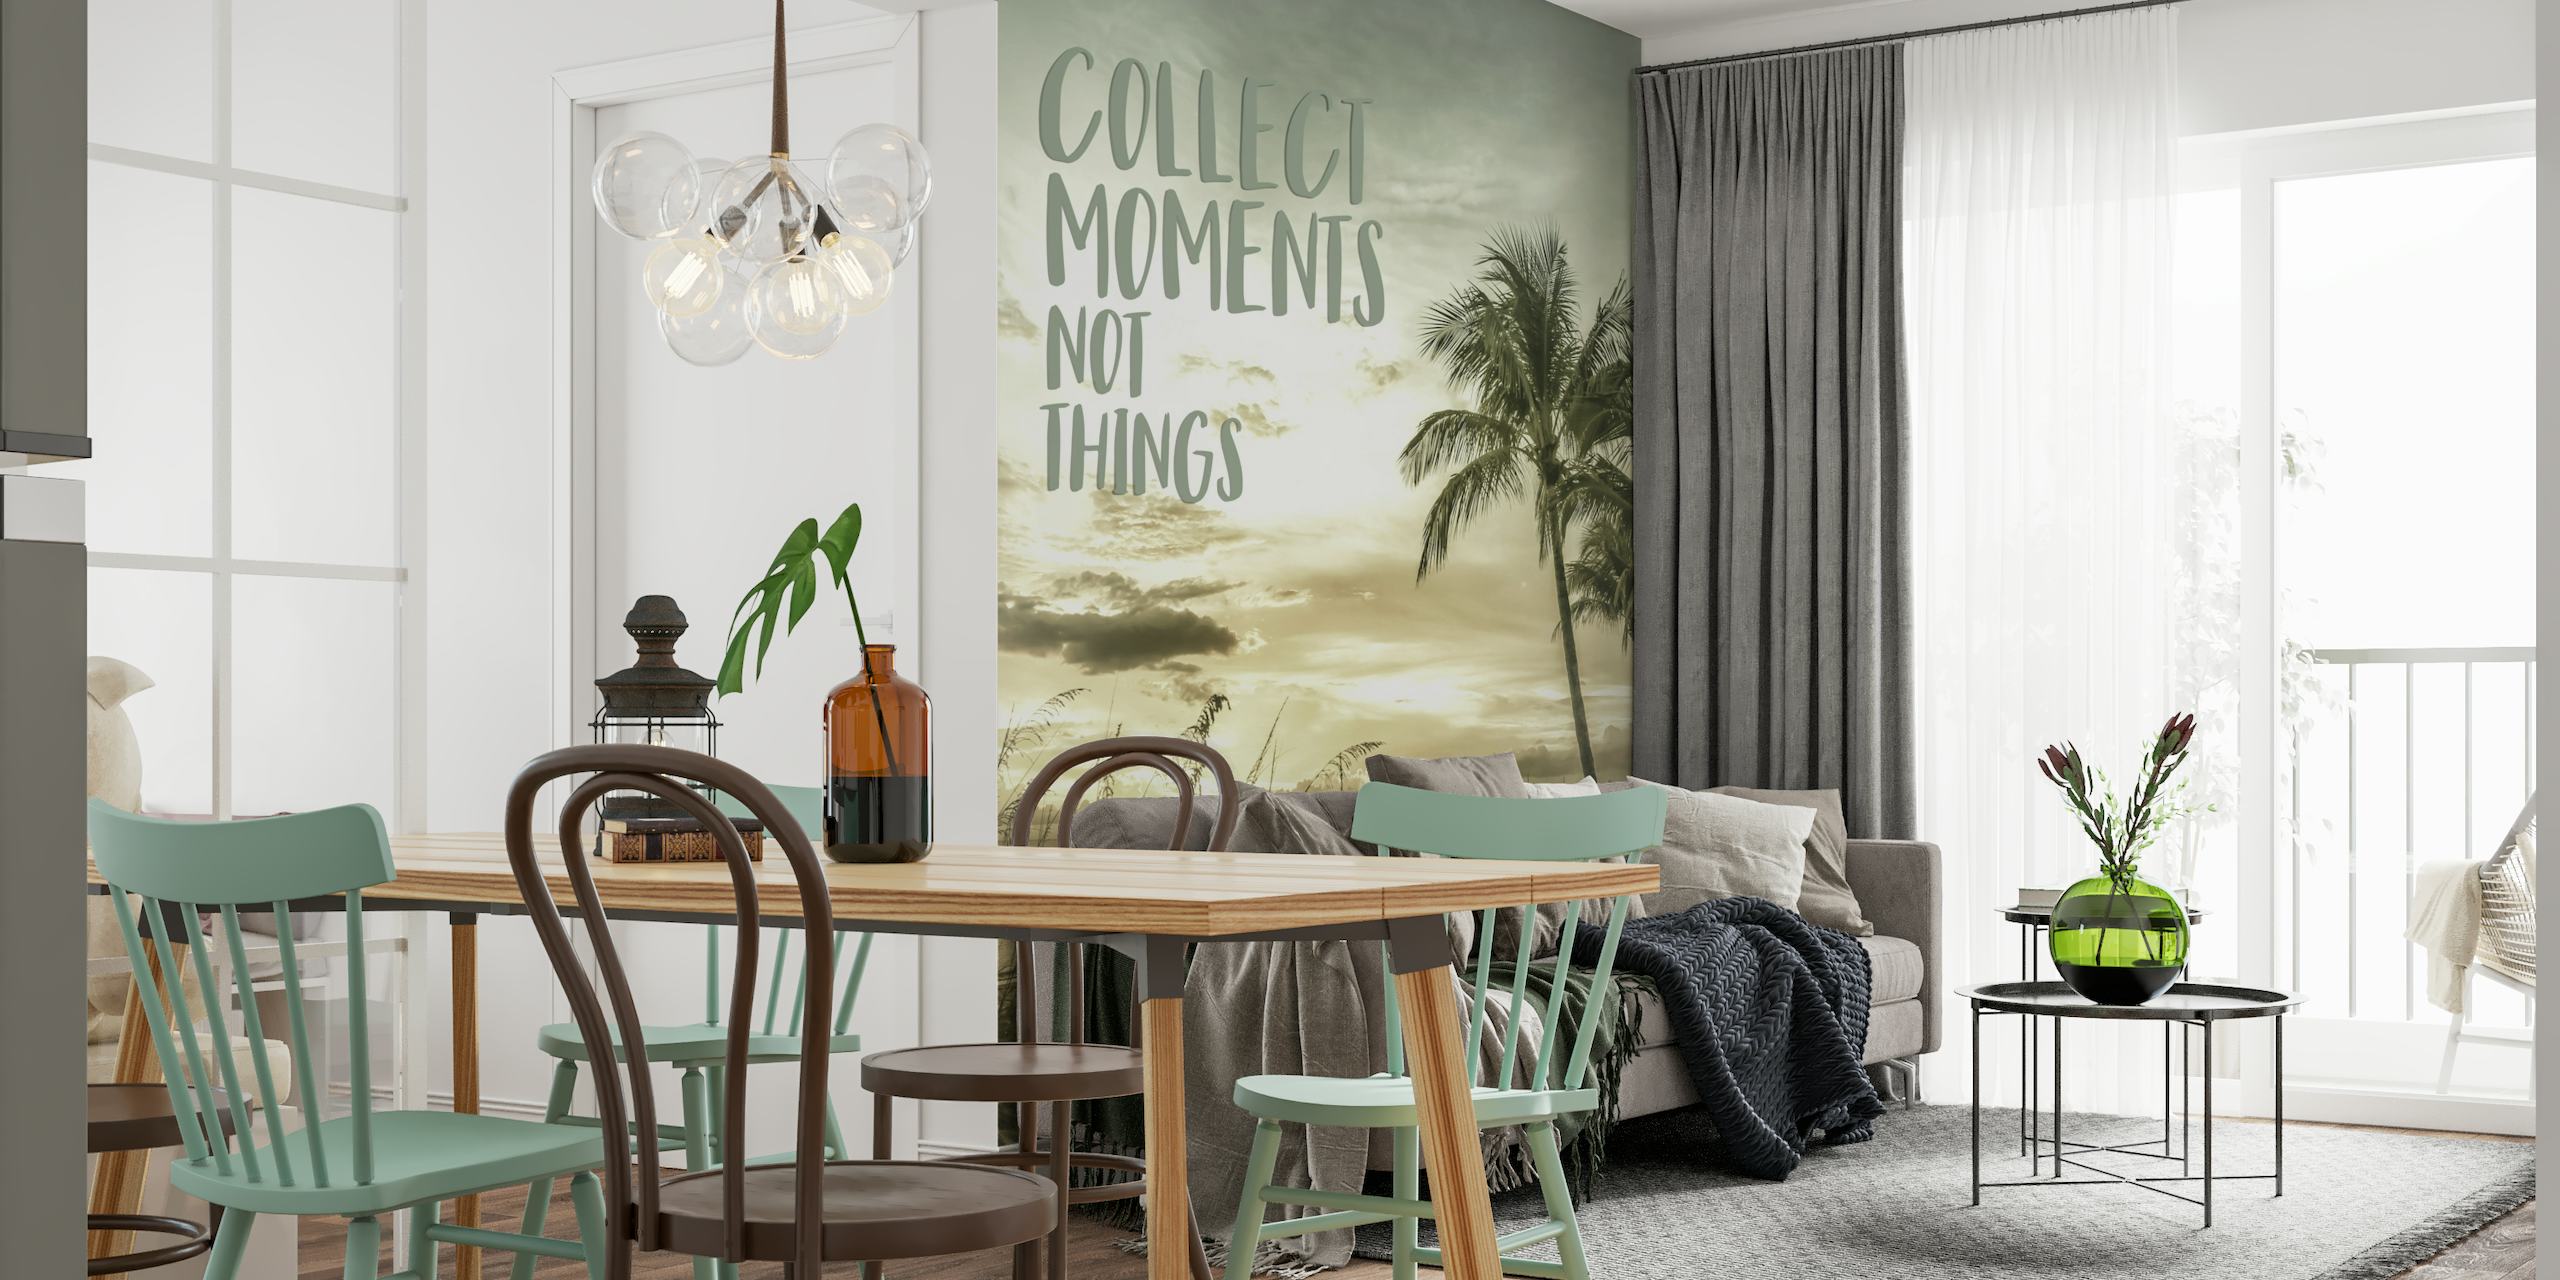 Collect moments not things | Sunset wallpaper